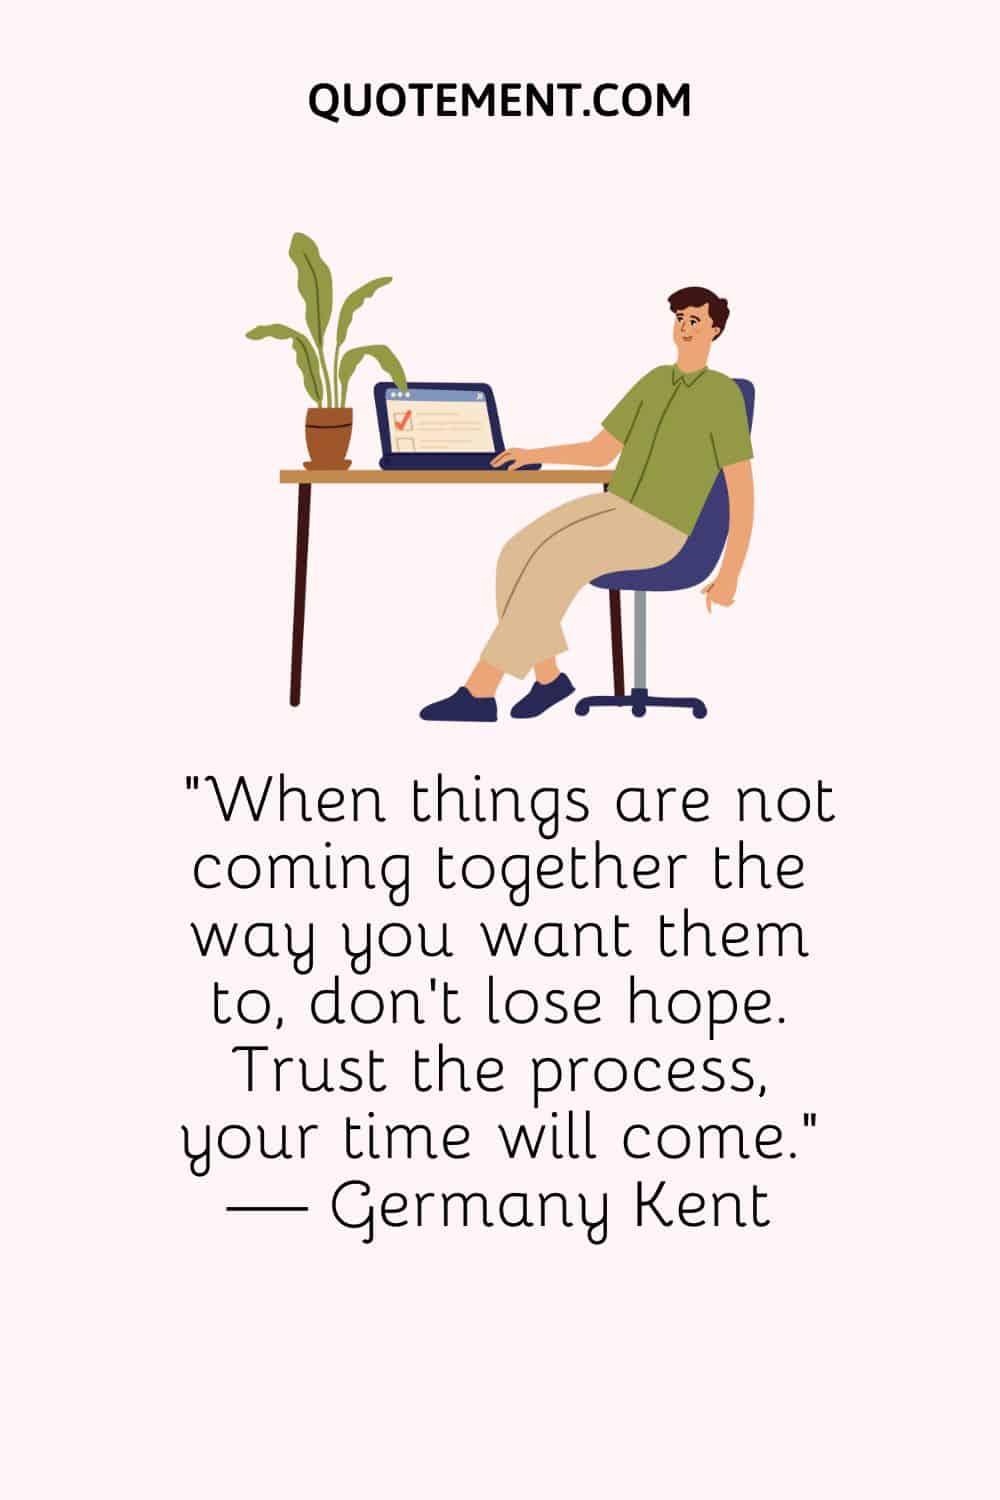 When things are not coming together the way you want them to, don't lose hope. 